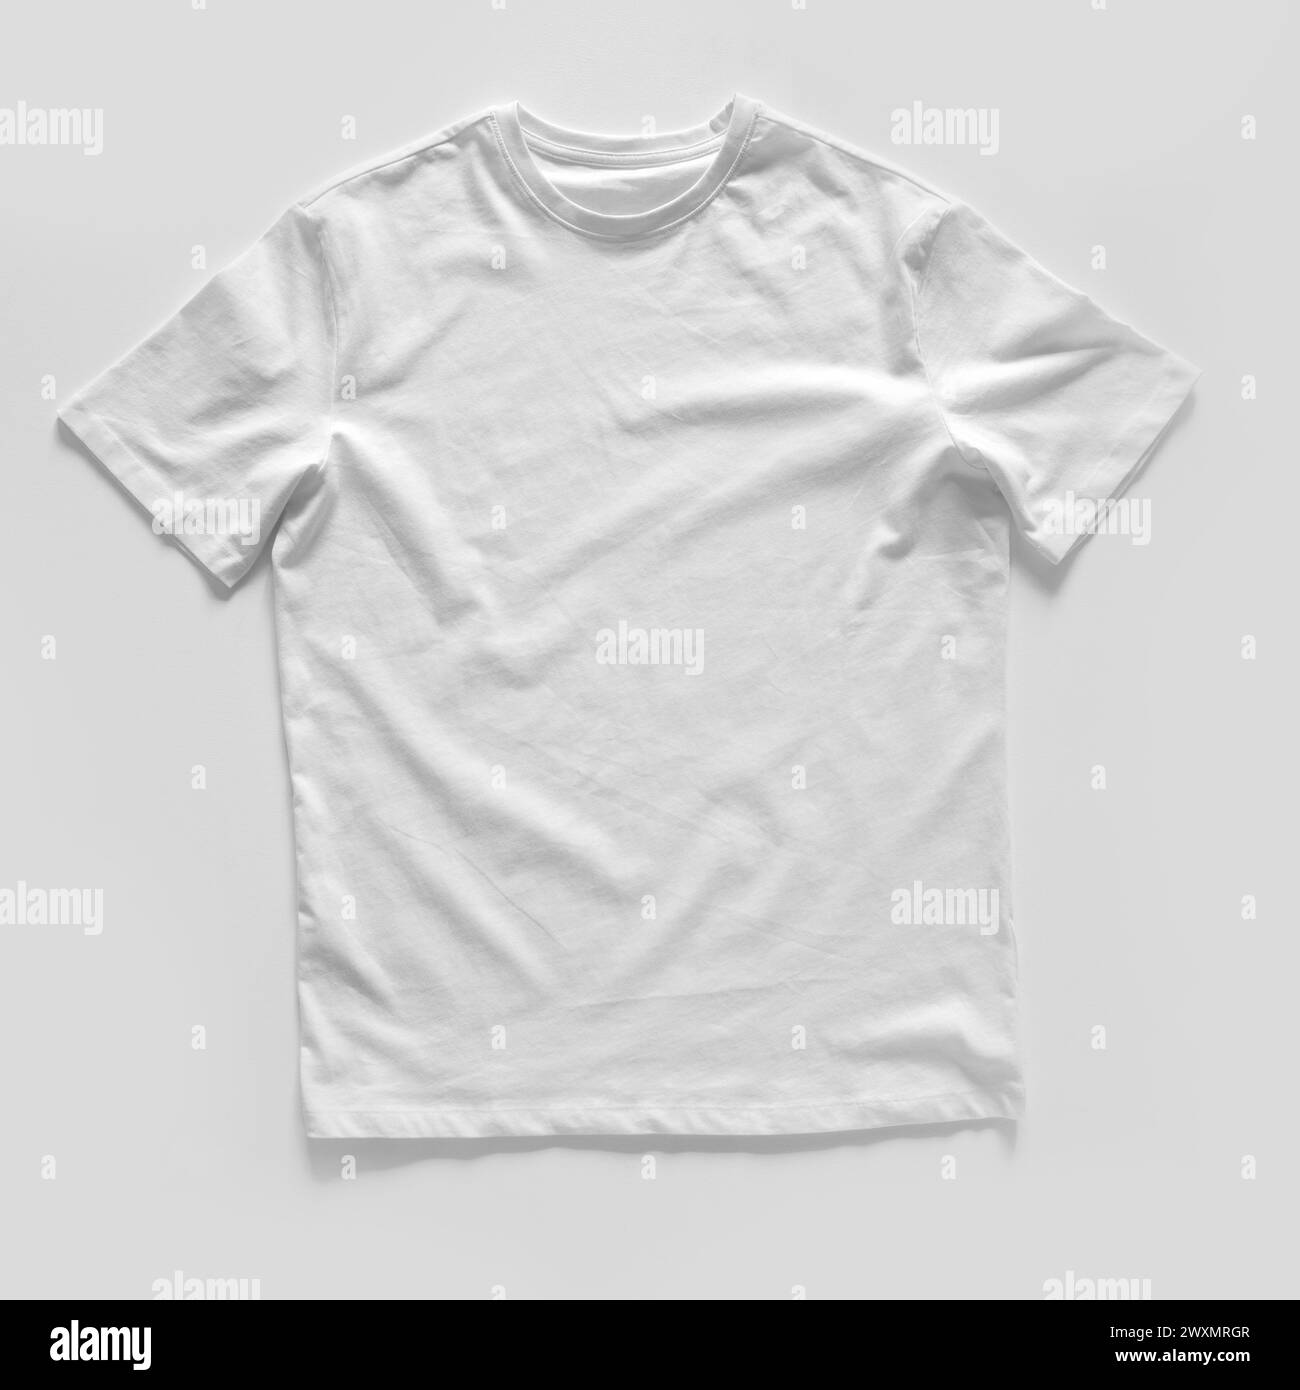 Plain White T-Shirt Displayed Flat on a Neutral Background Stock Photo